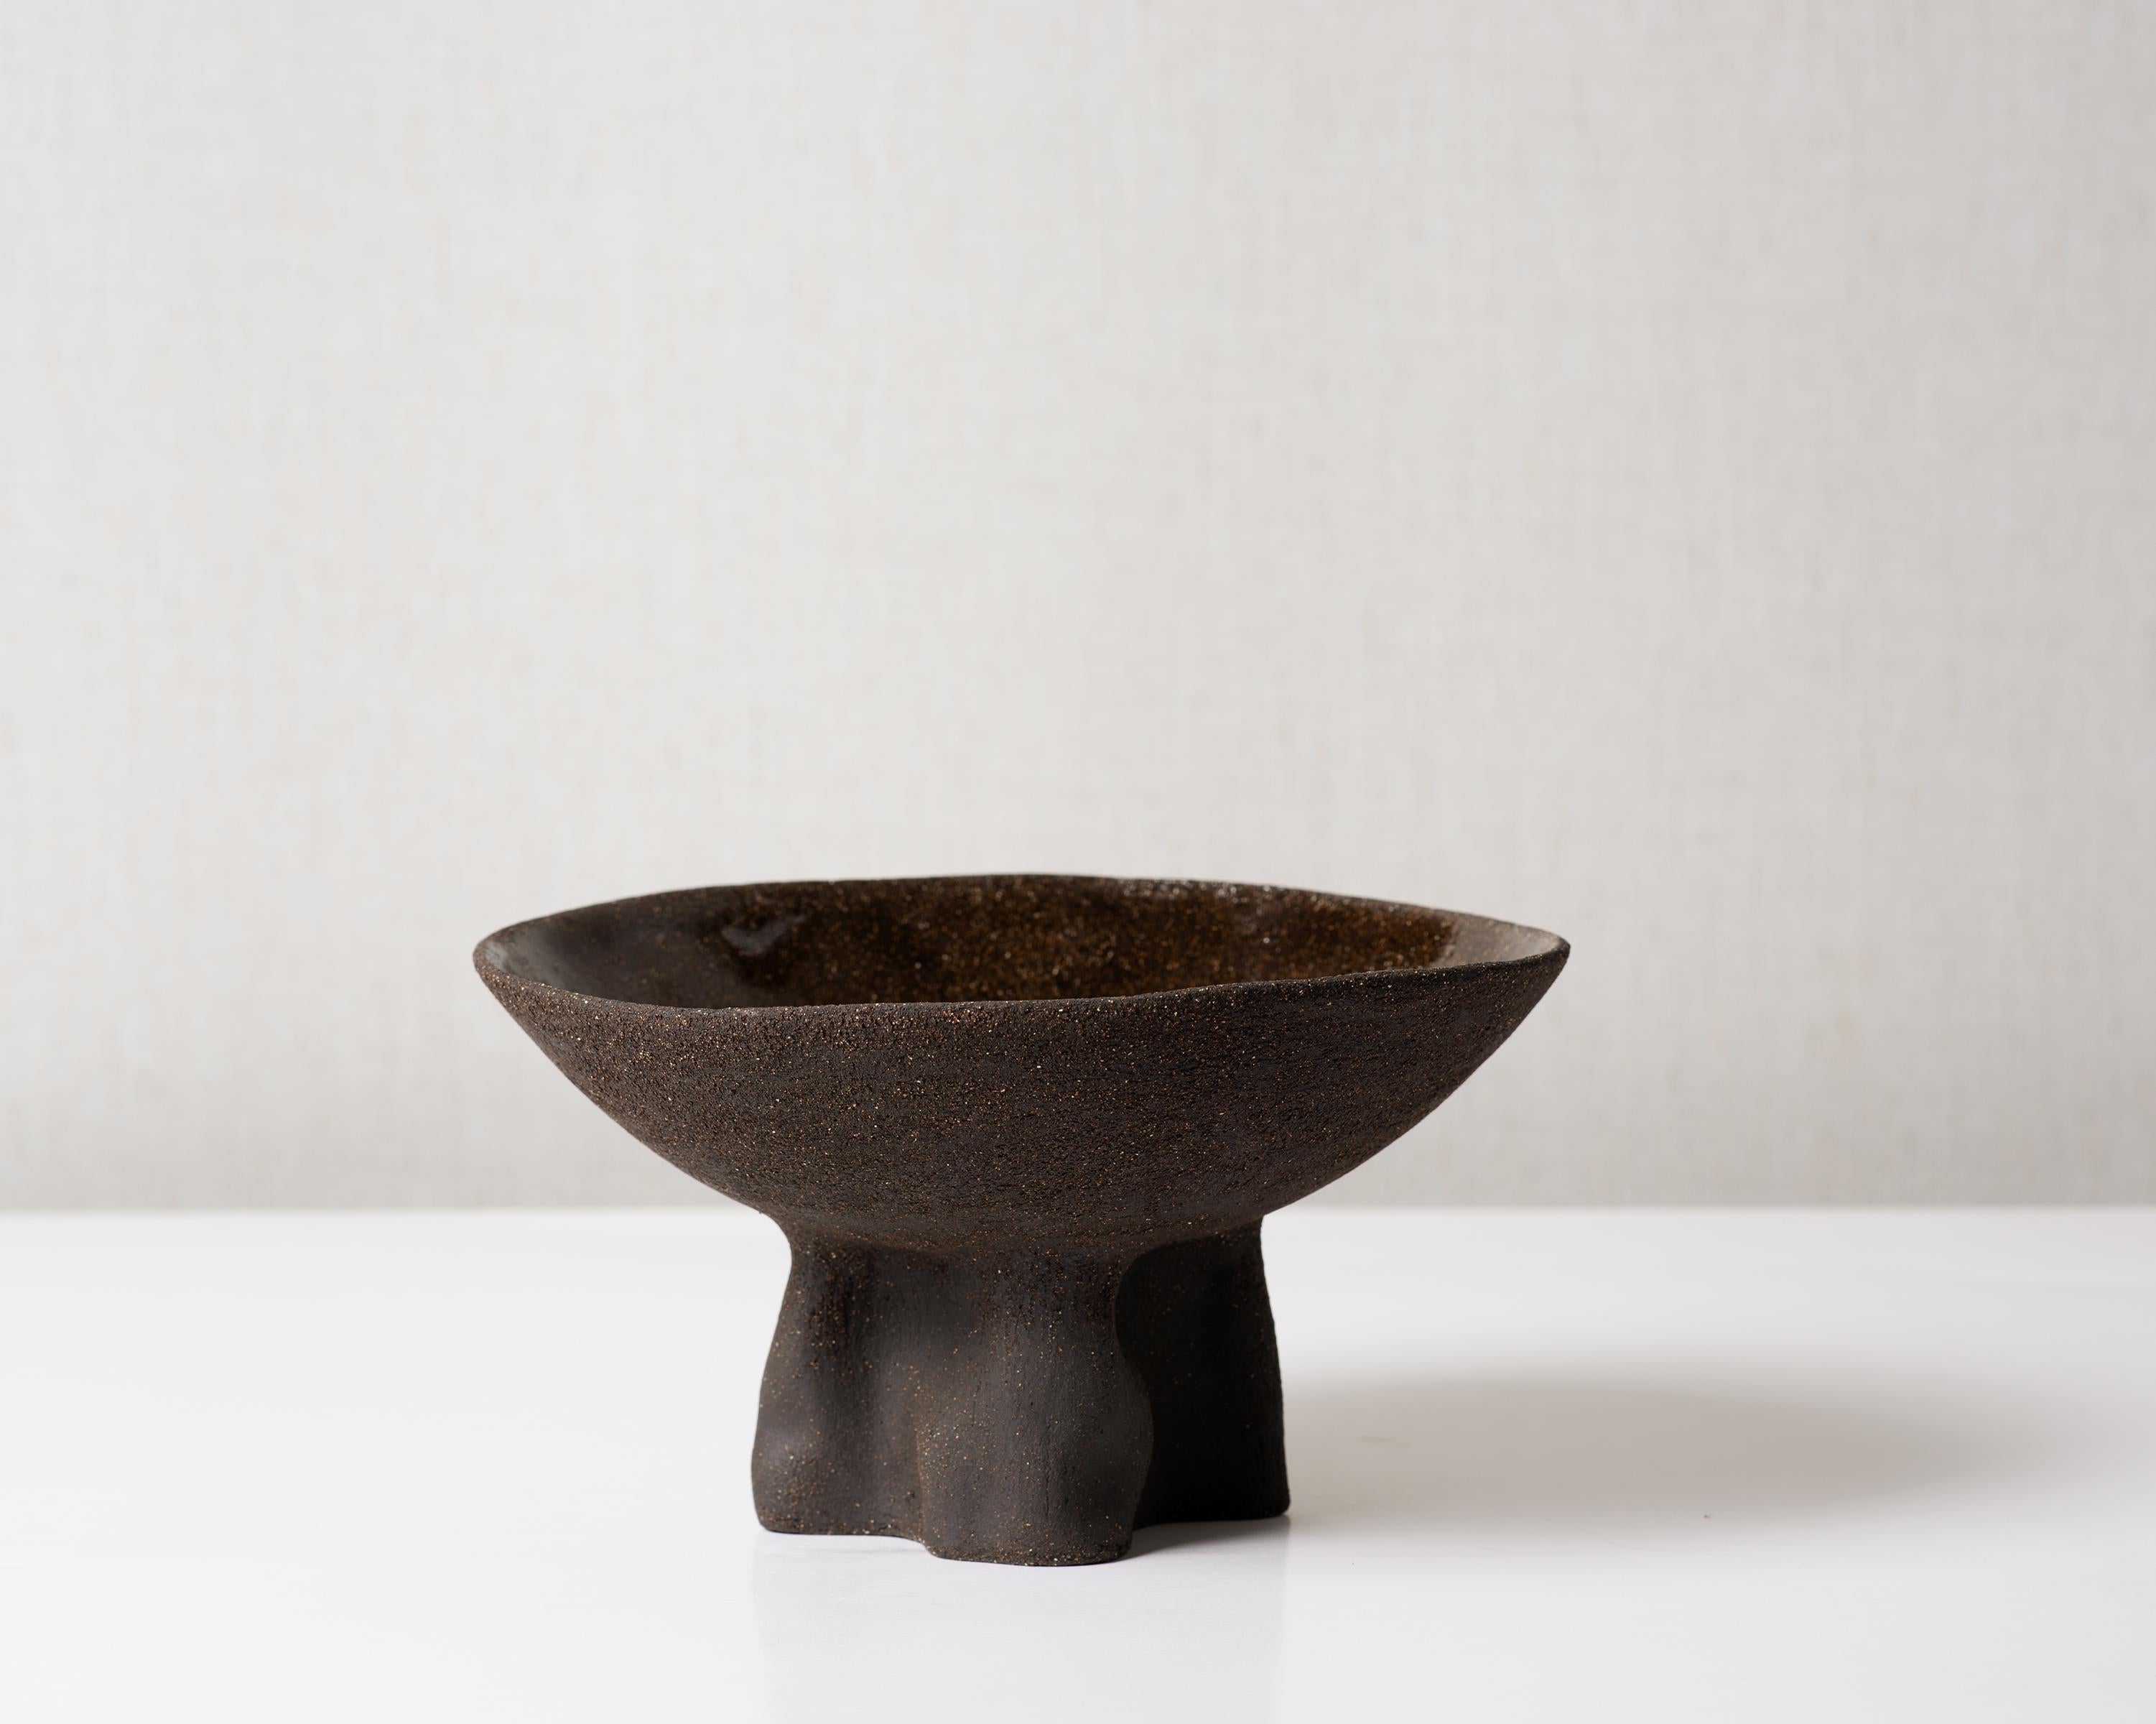 Fruit Bowl with folded stand
Black Truffle Clay and Sheer Glaze
L: 21cm H: 12cm
Unique Piece made in Belgium - 2021
